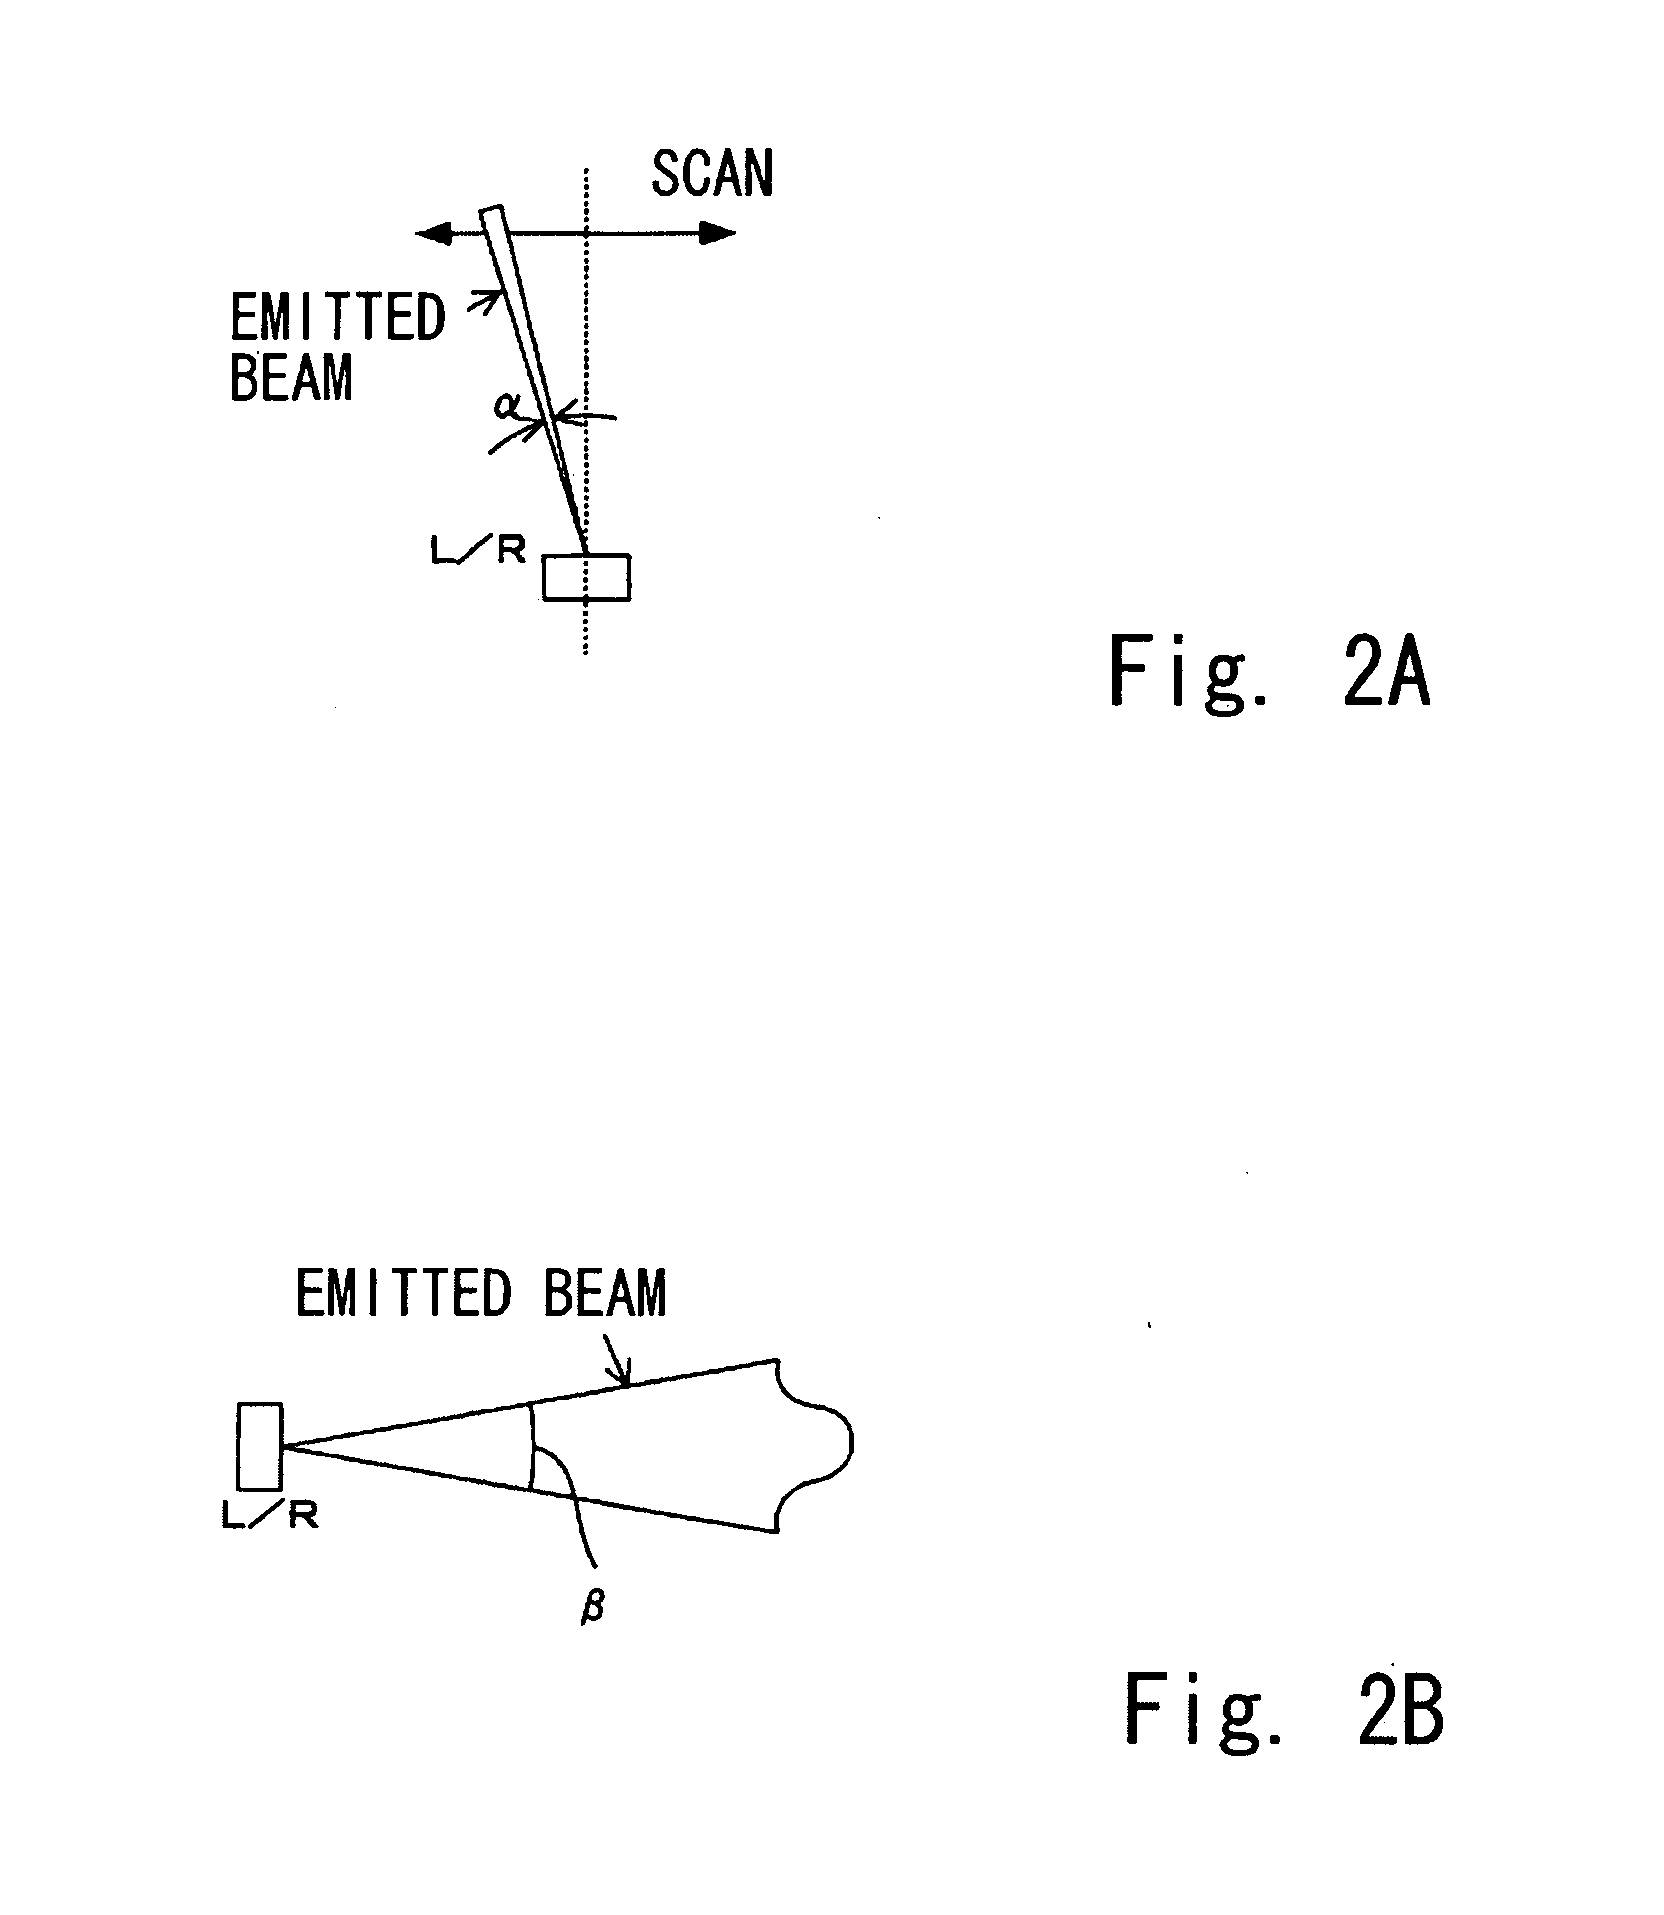 Image processing system for mounting to a vehicle